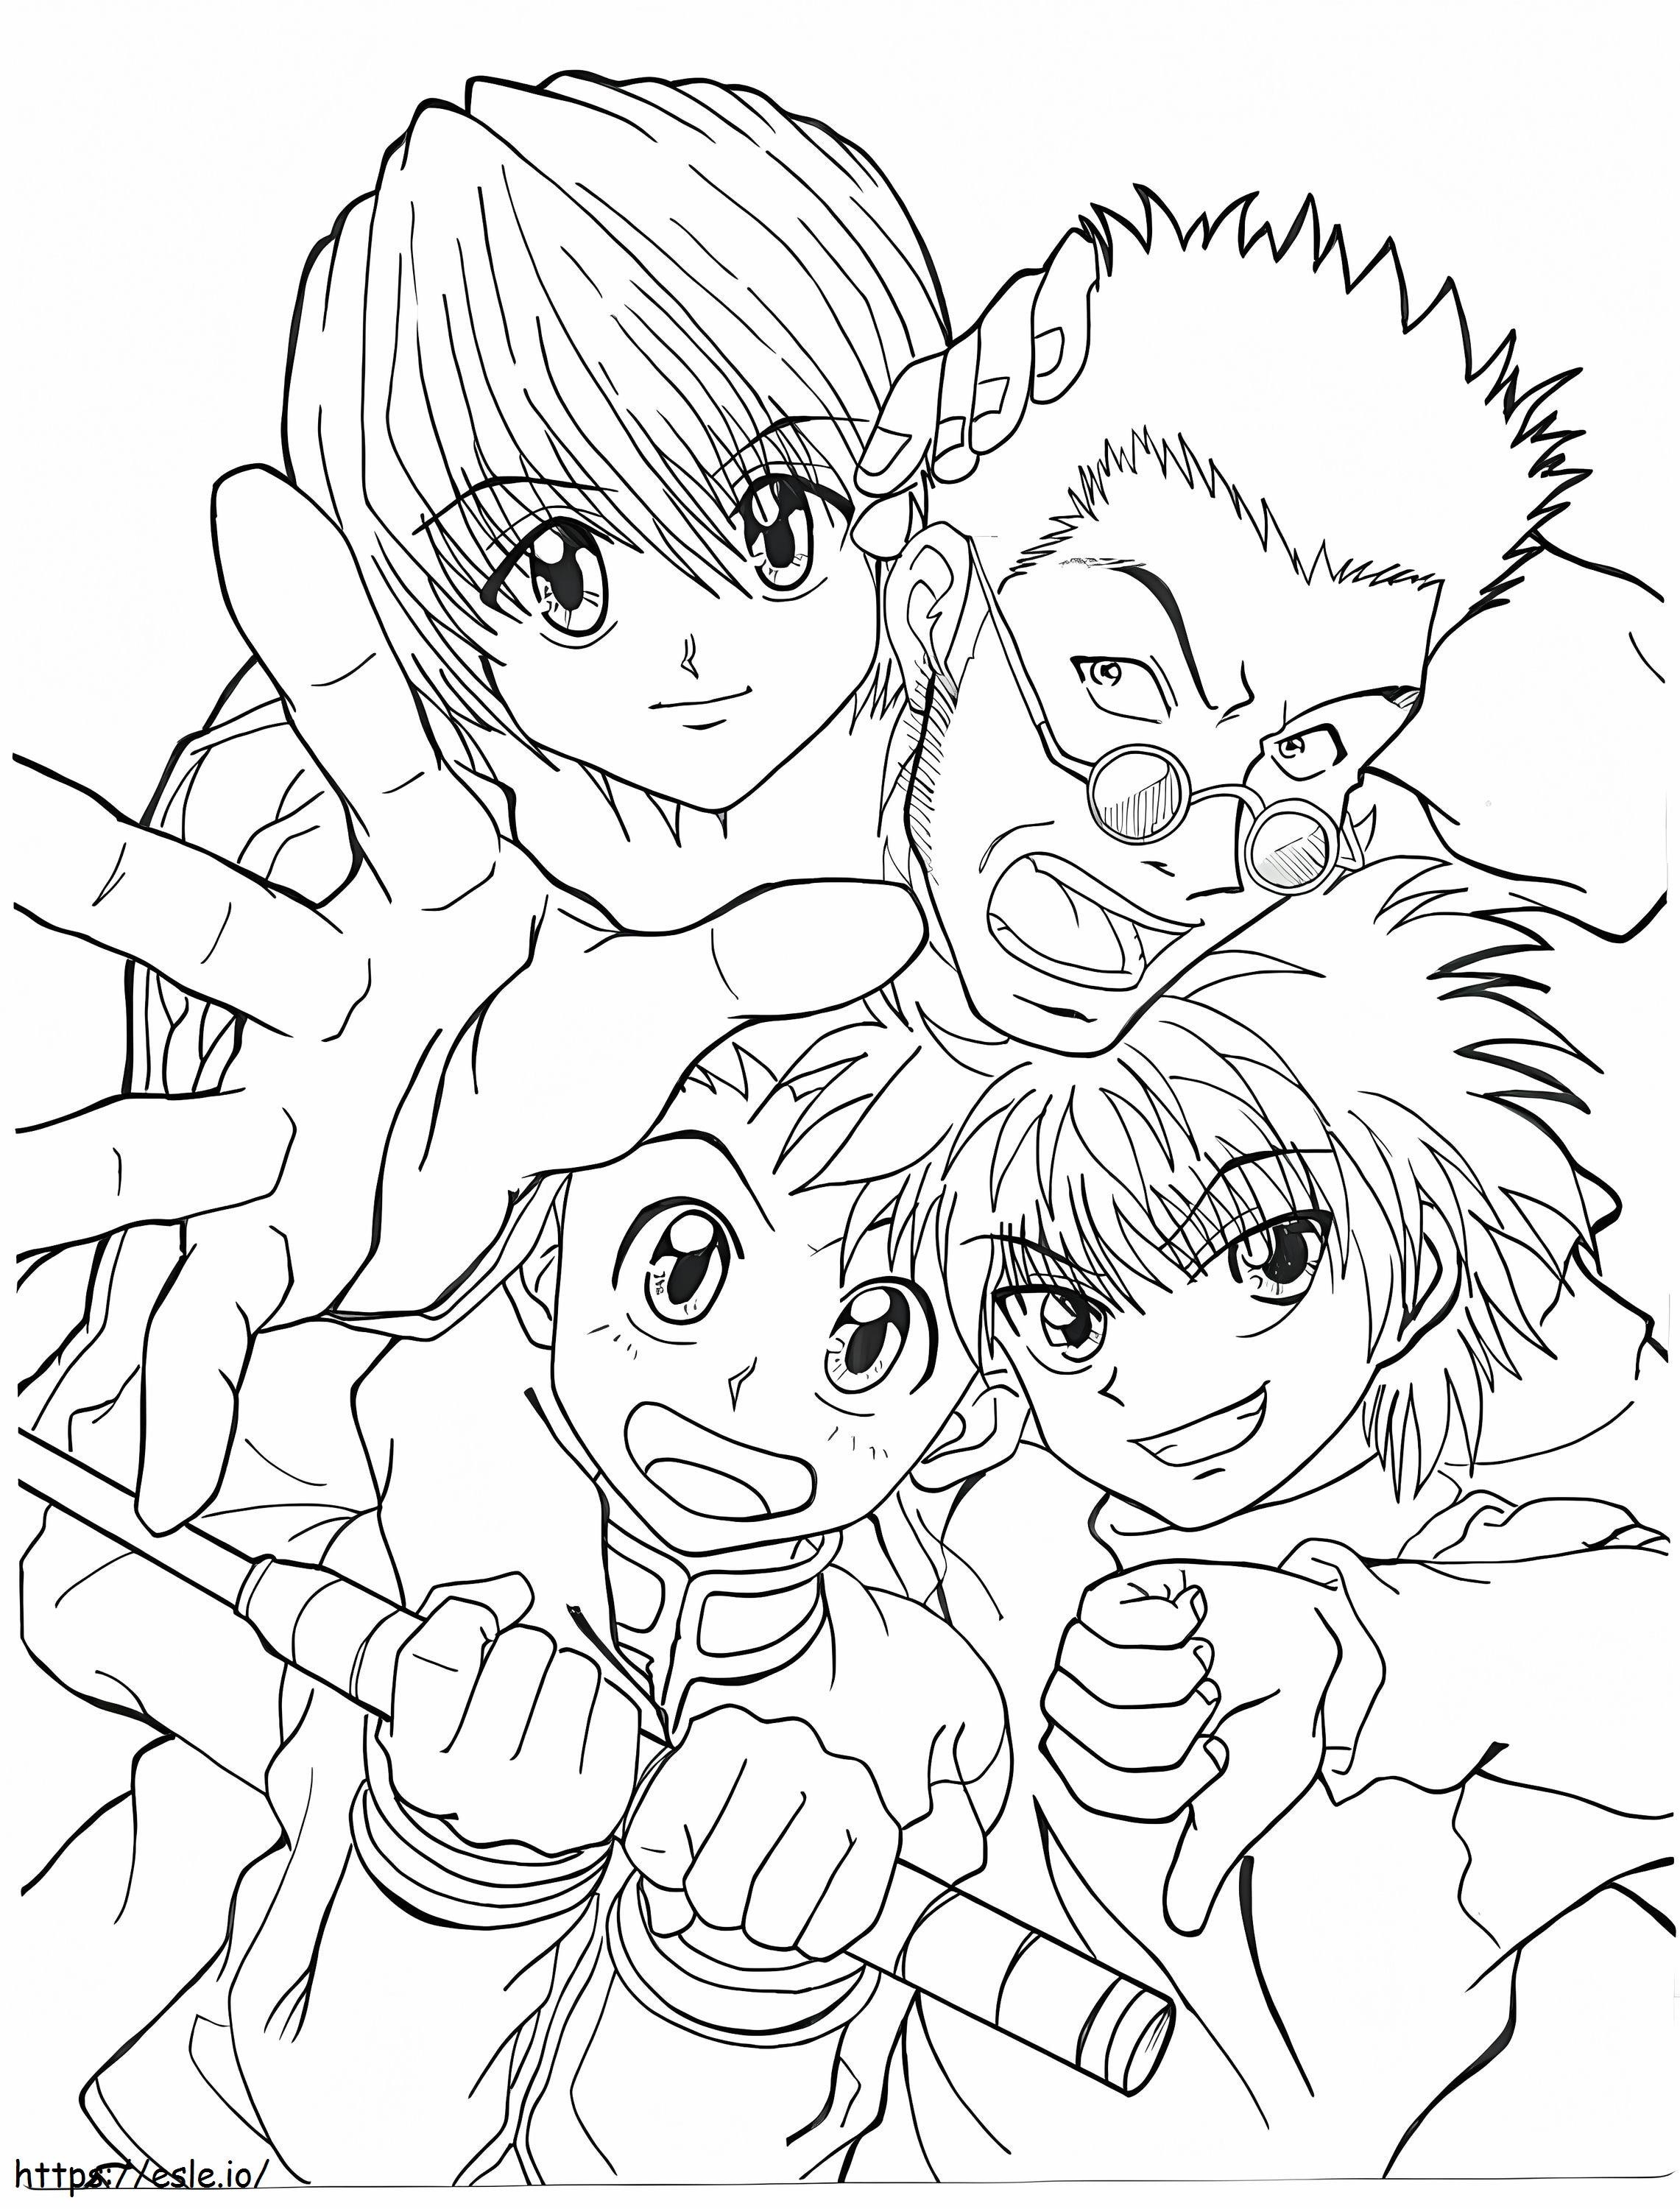 how to draw hunter x hunter characters